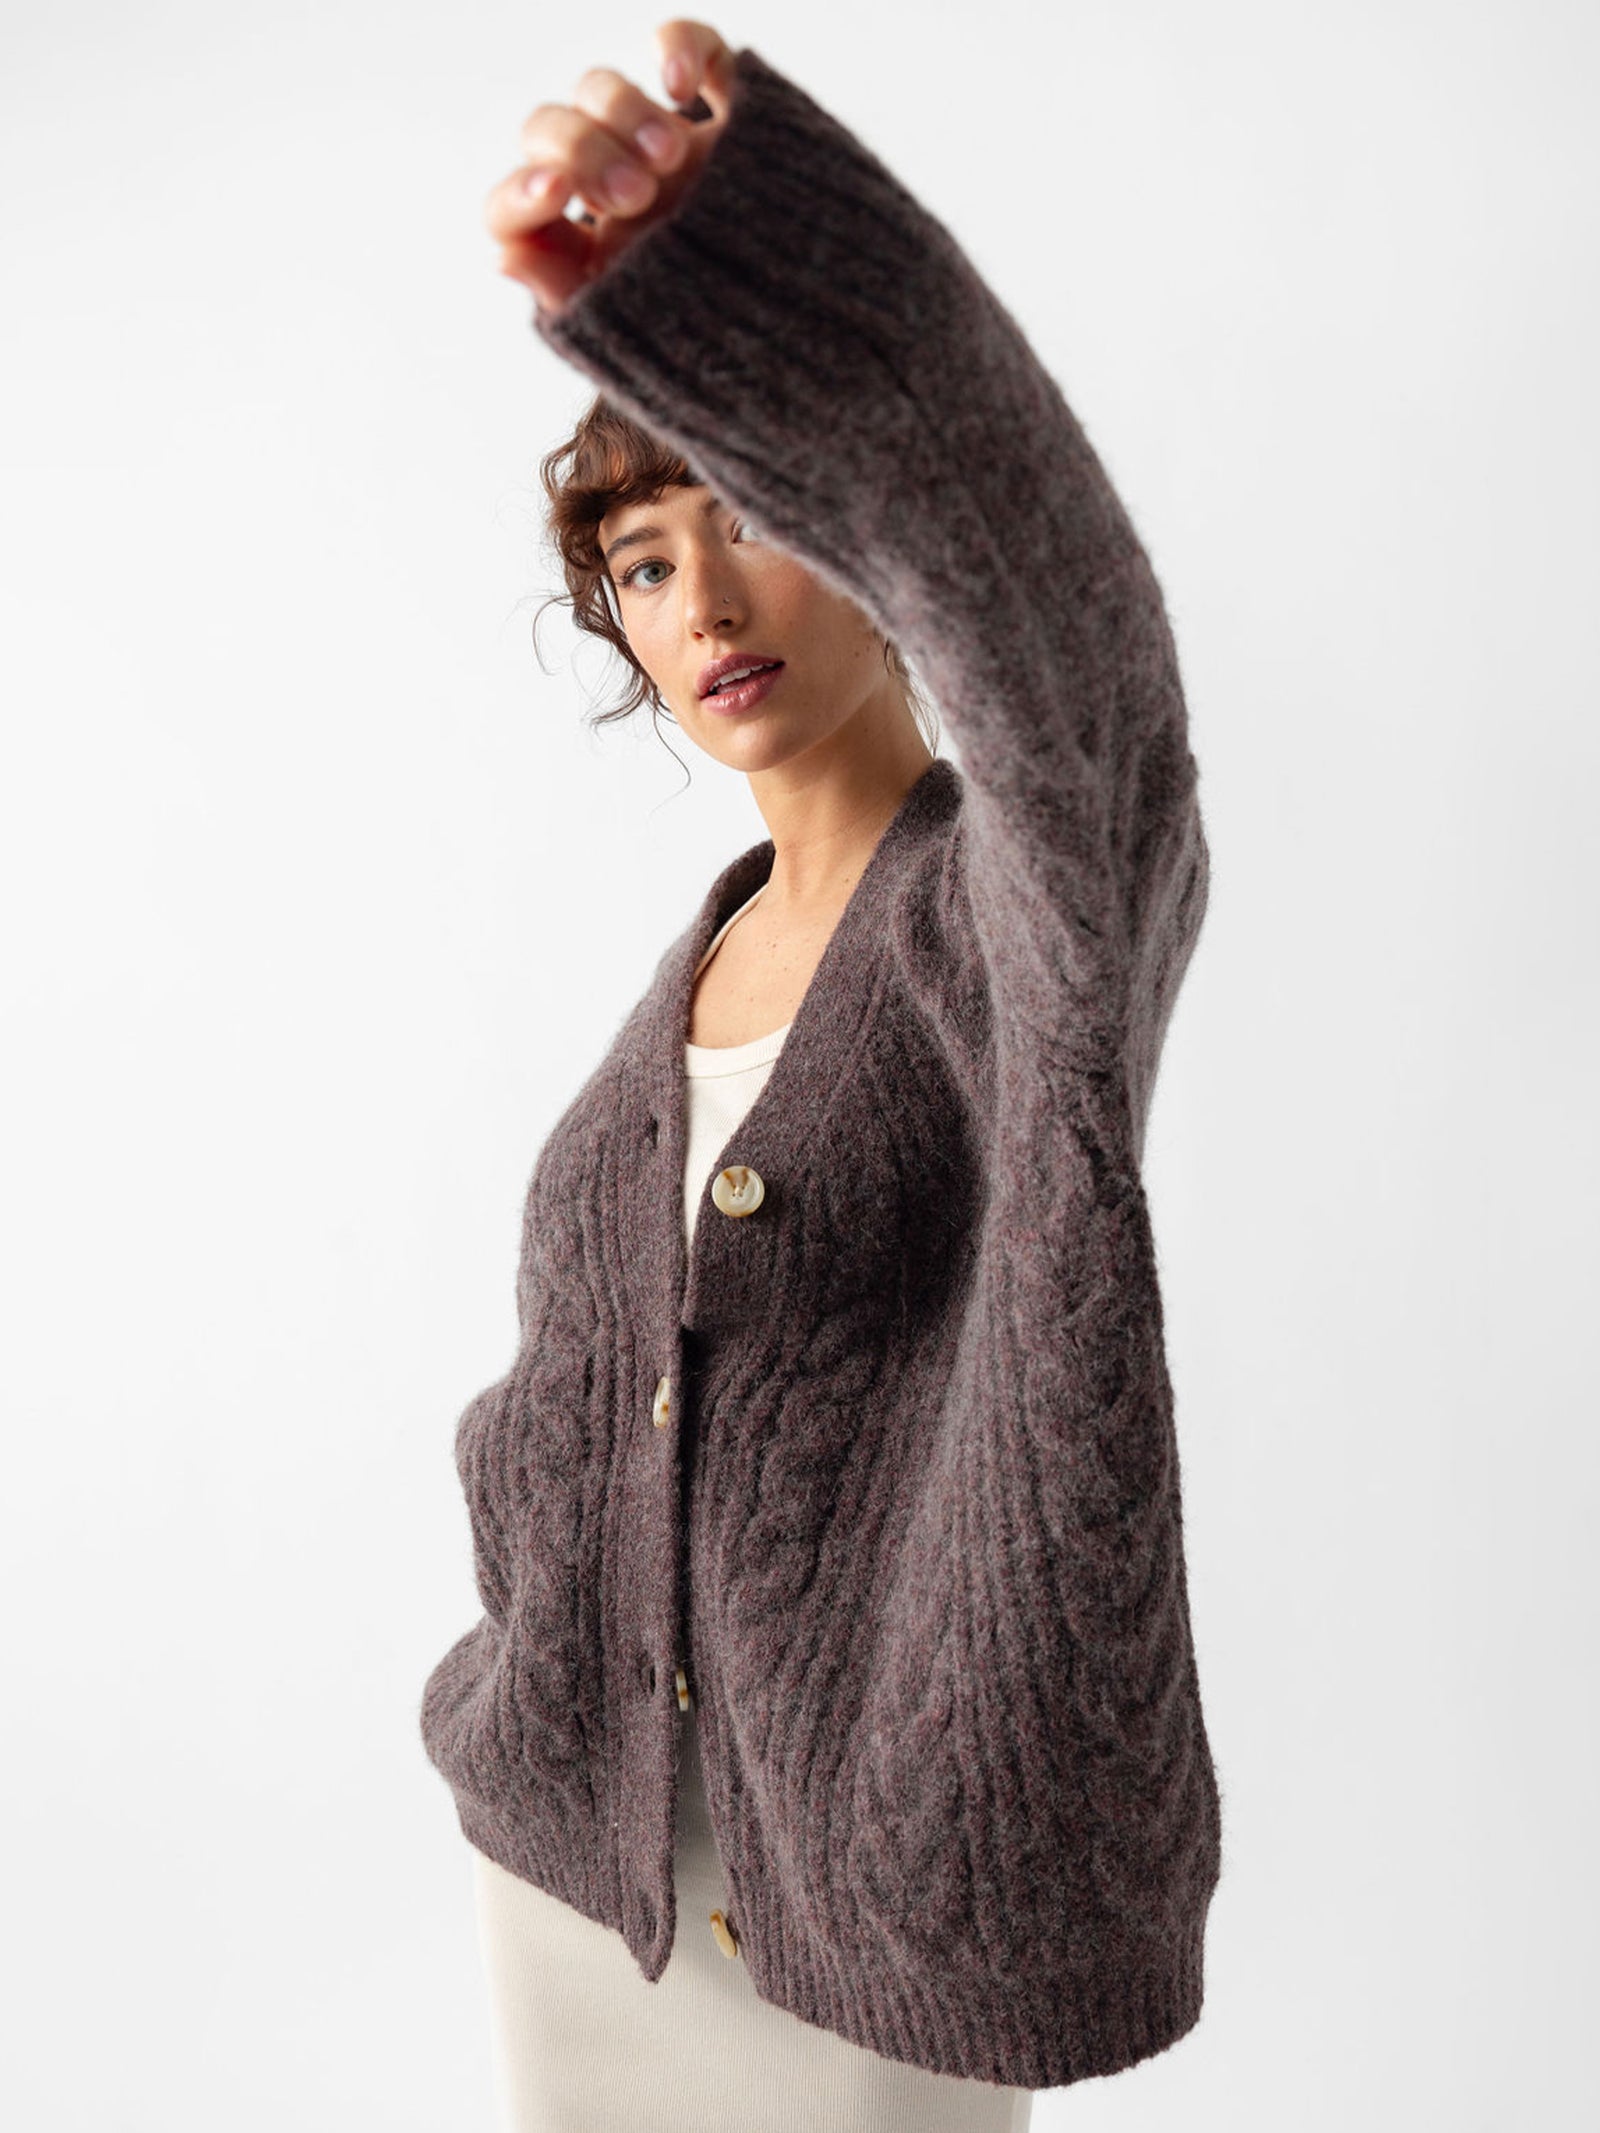 Studio image of woman wearing bordeaux cardigan holding her left arm toward the camera 